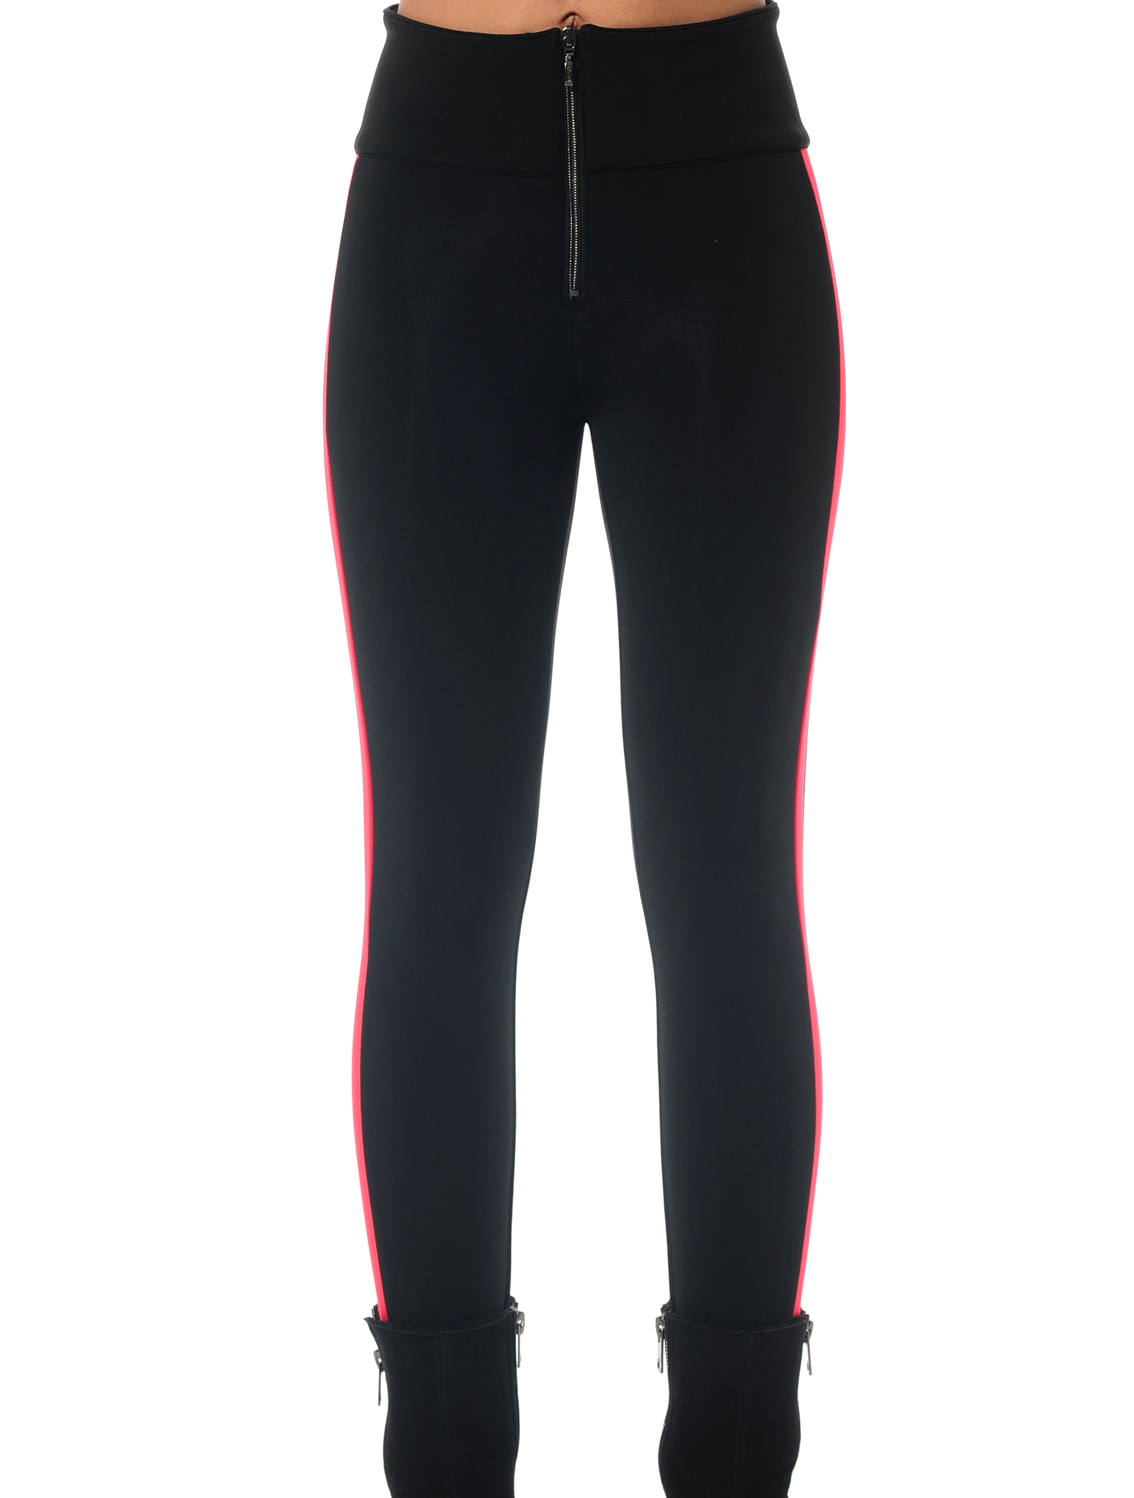 4way stretch in-boot ski pants black/red 